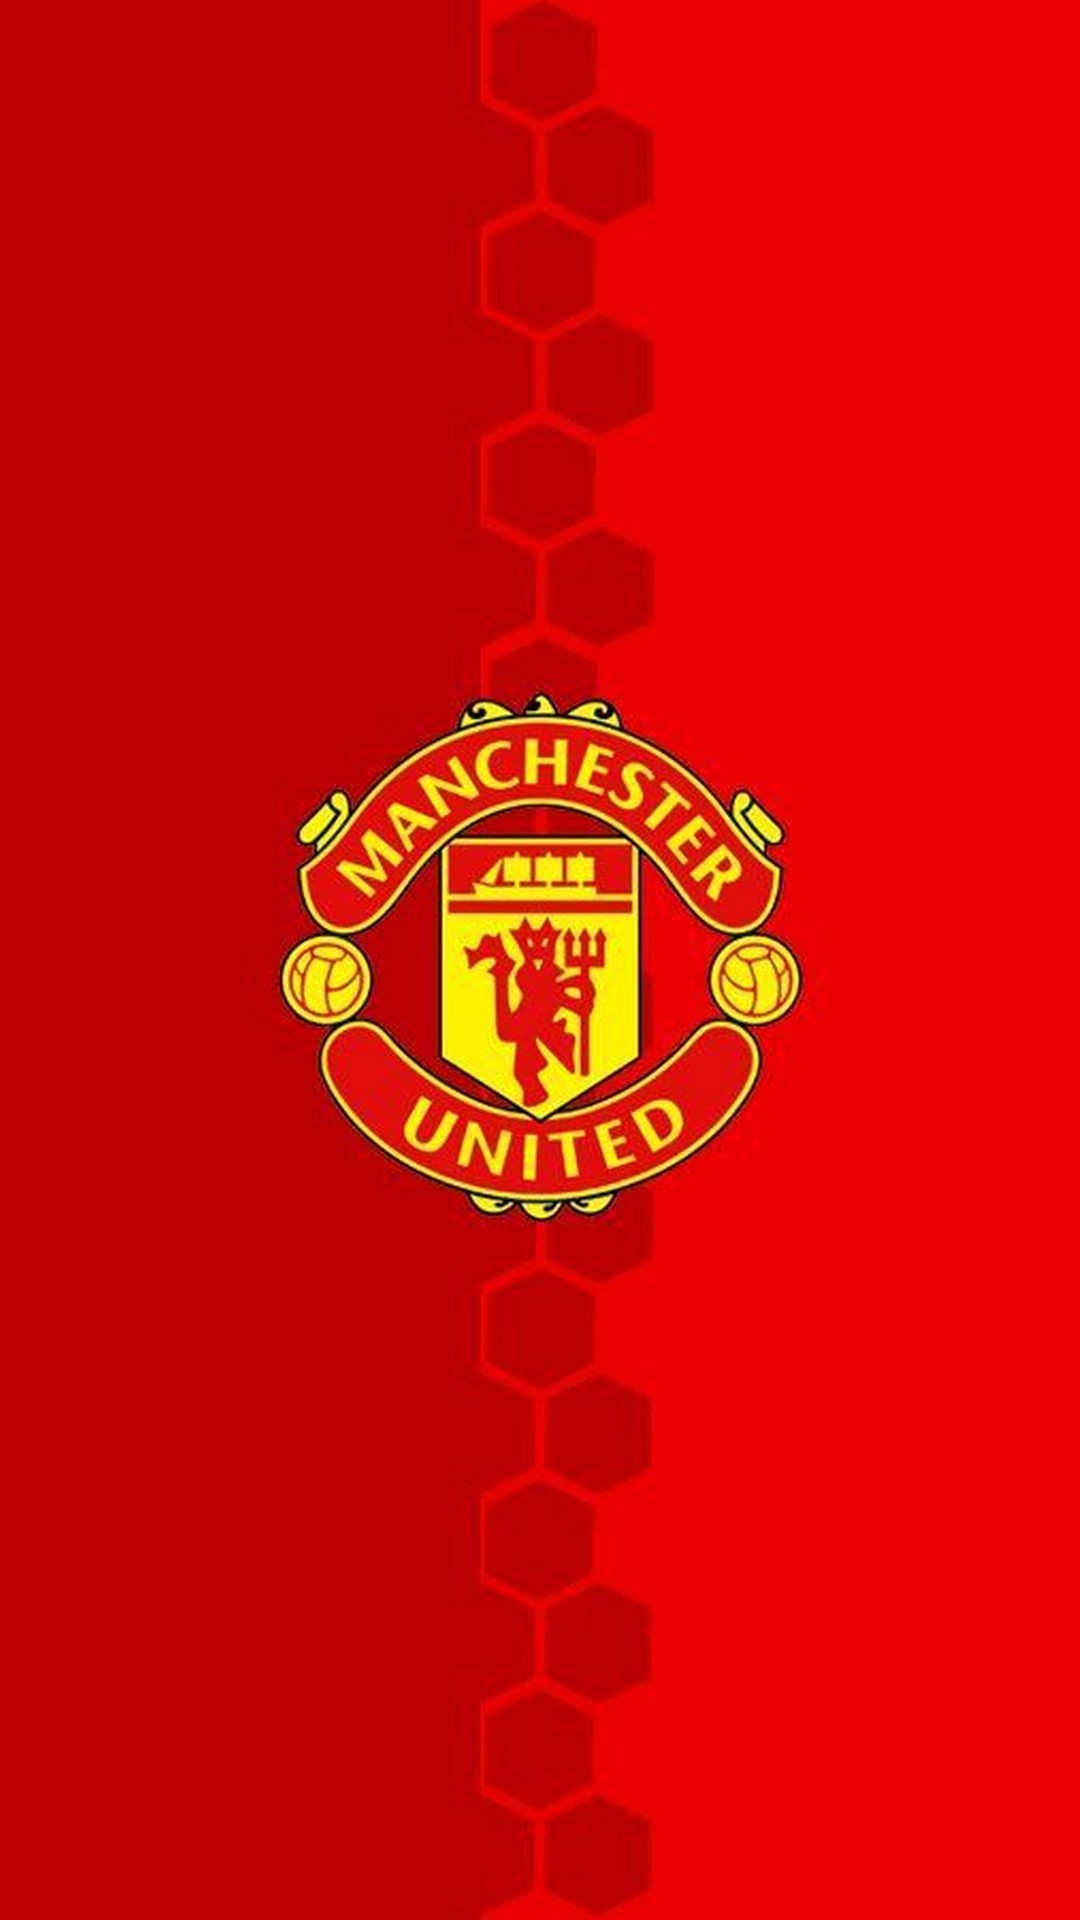 Manchester United HD Wallpaper For iPhone With high-resolution 1080X1920 pixel. You can use this wallpaper for your Desktop Computers, Mac Screensavers, Windows Backgrounds, iPhone Wallpapers, Tablet or Android Lock screen and another Mobile device